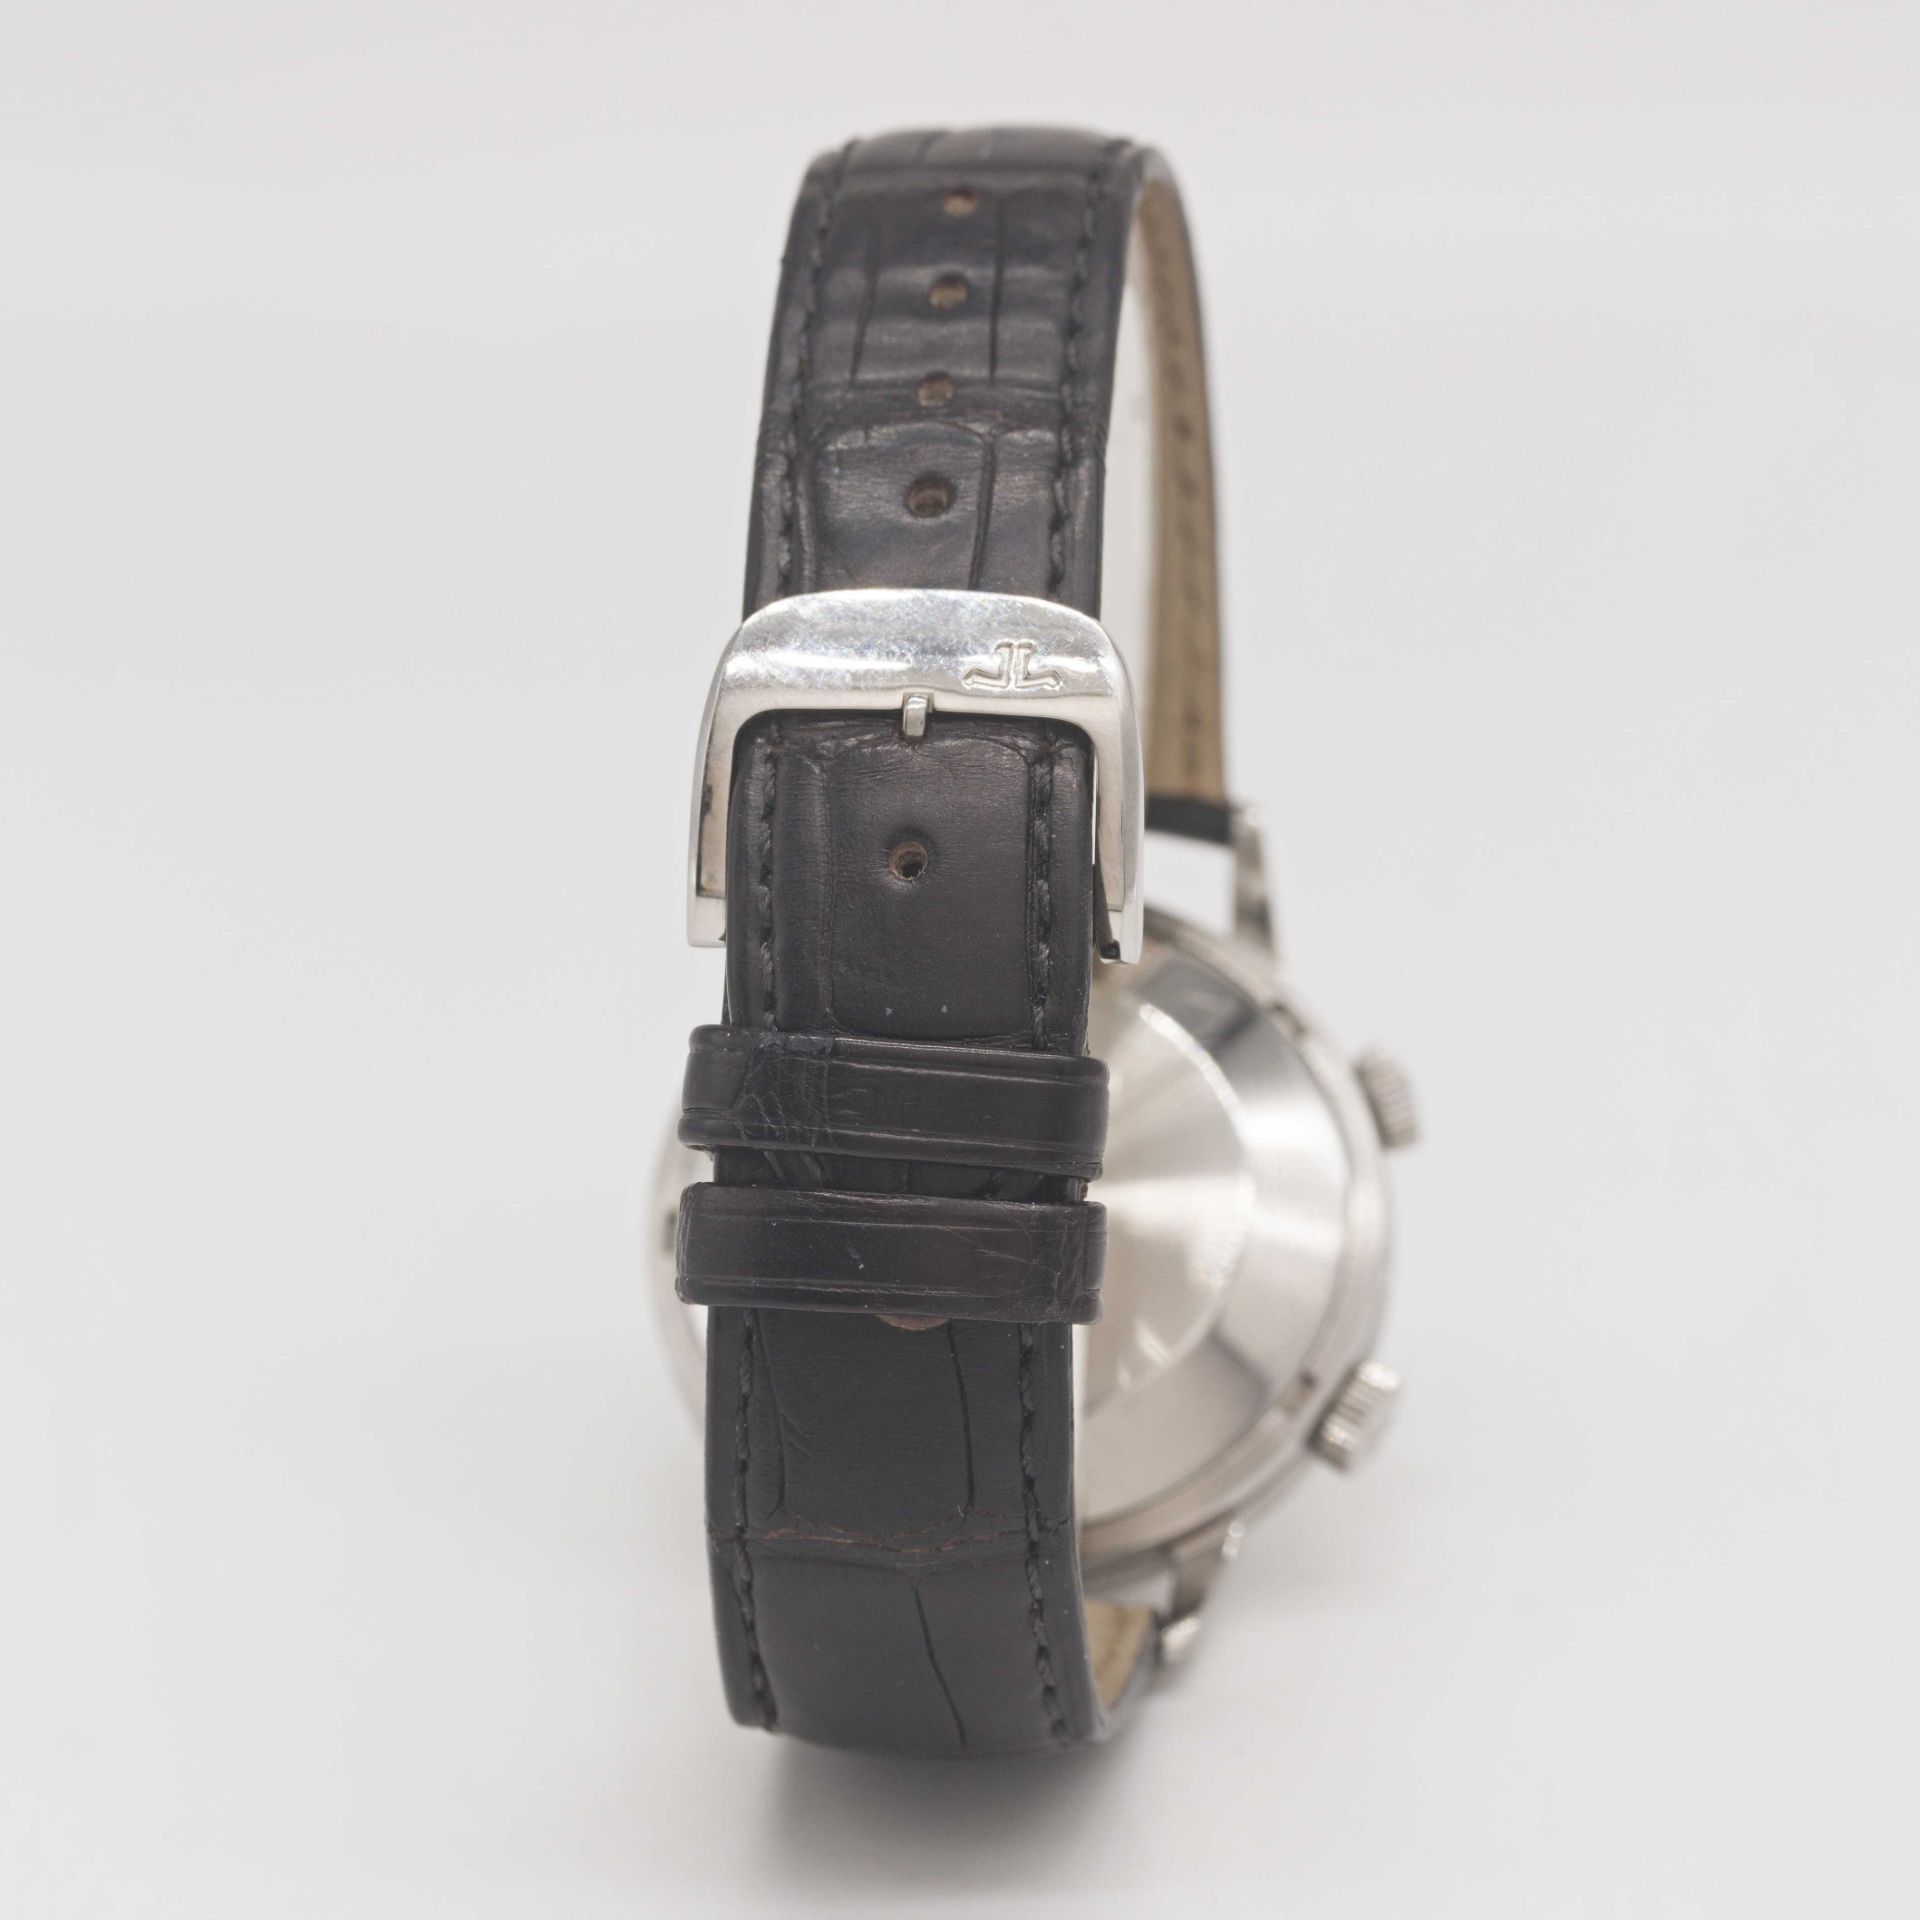 A GENTLEMAN'S STAINLESS STEEL JAEGER LECOULTRE MEMOVOX AUTOMATIC ALARM WRIST WATCH CIRCA 1960s, REF. - Image 6 of 9